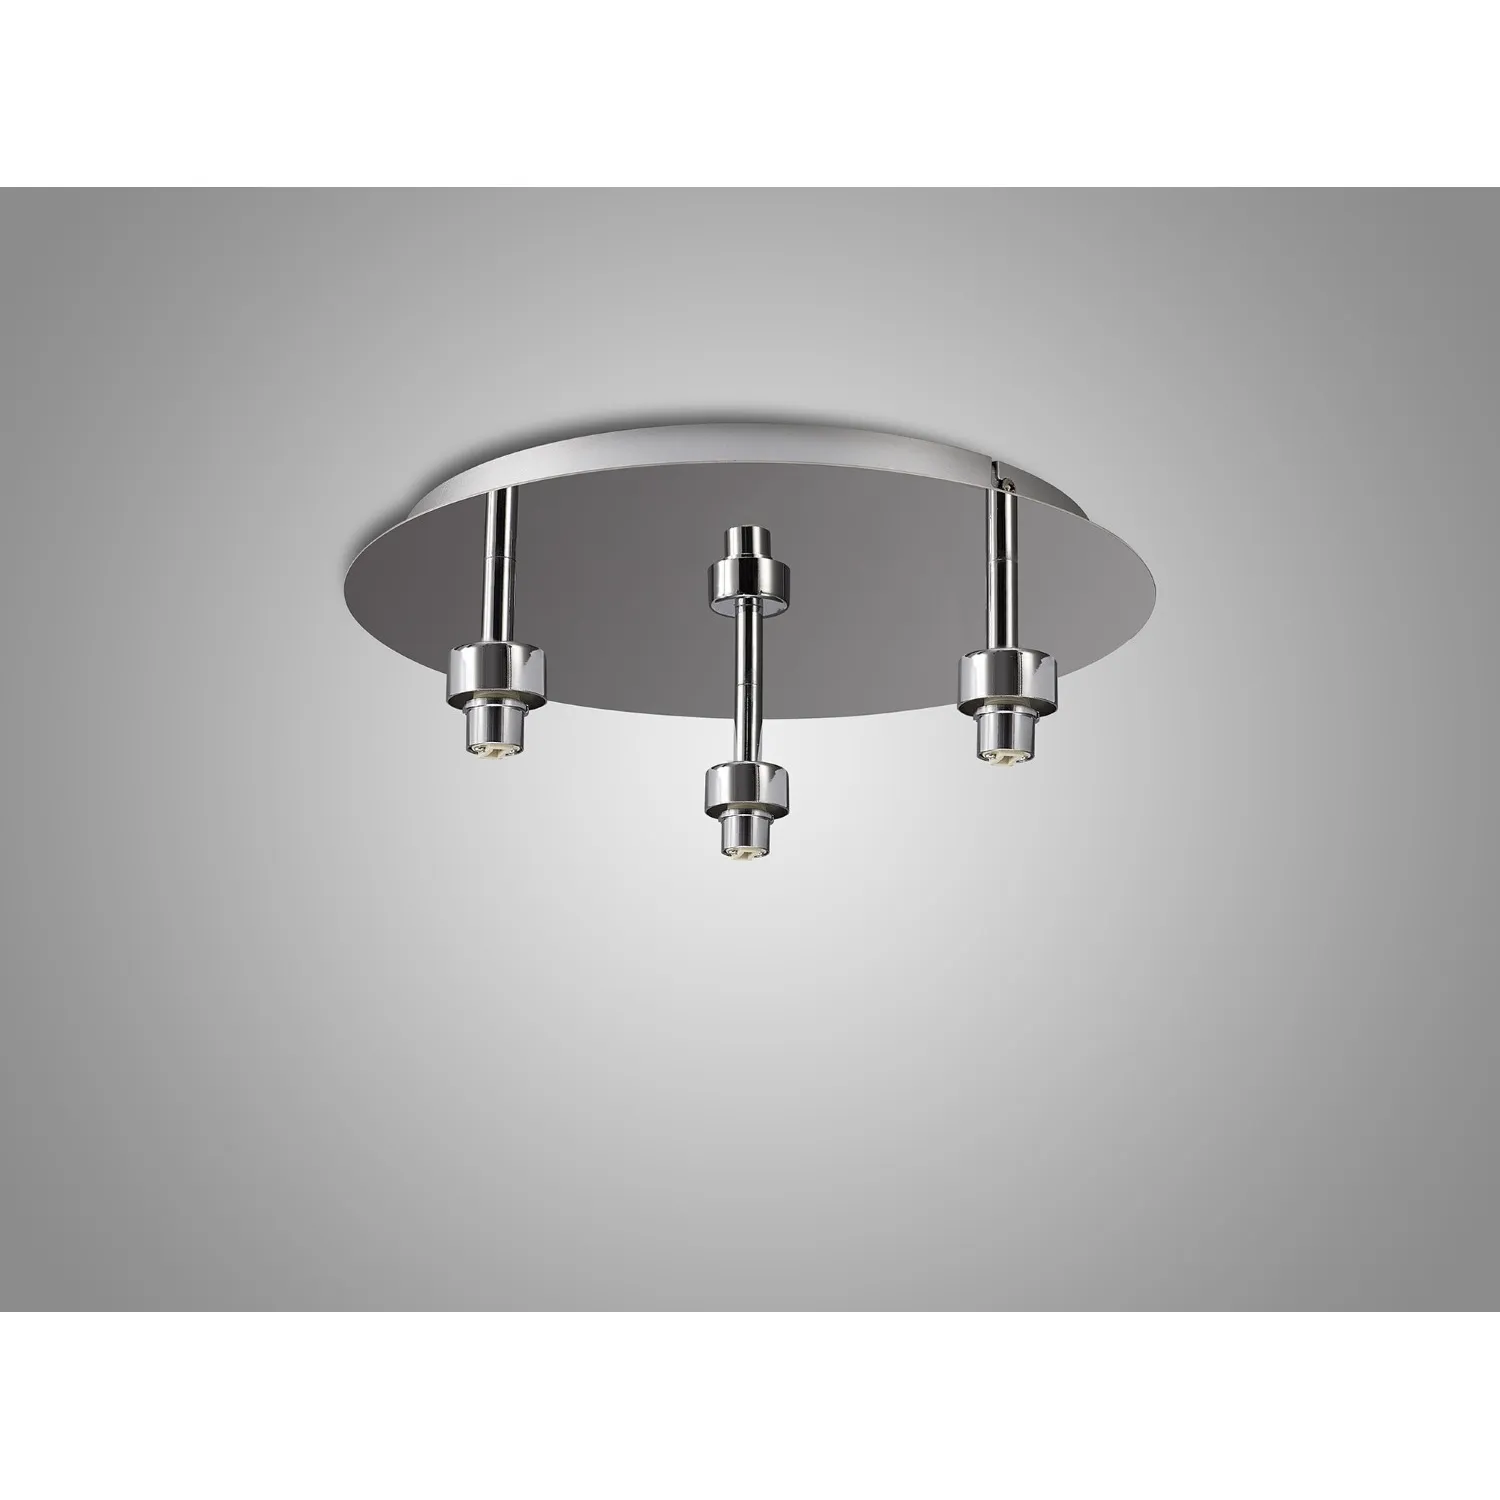 Abingdon Polished Chrome Round 3 Light G9 Universal 35cm Flush Light, Suitable For A Vast Selection Of Glass Shades